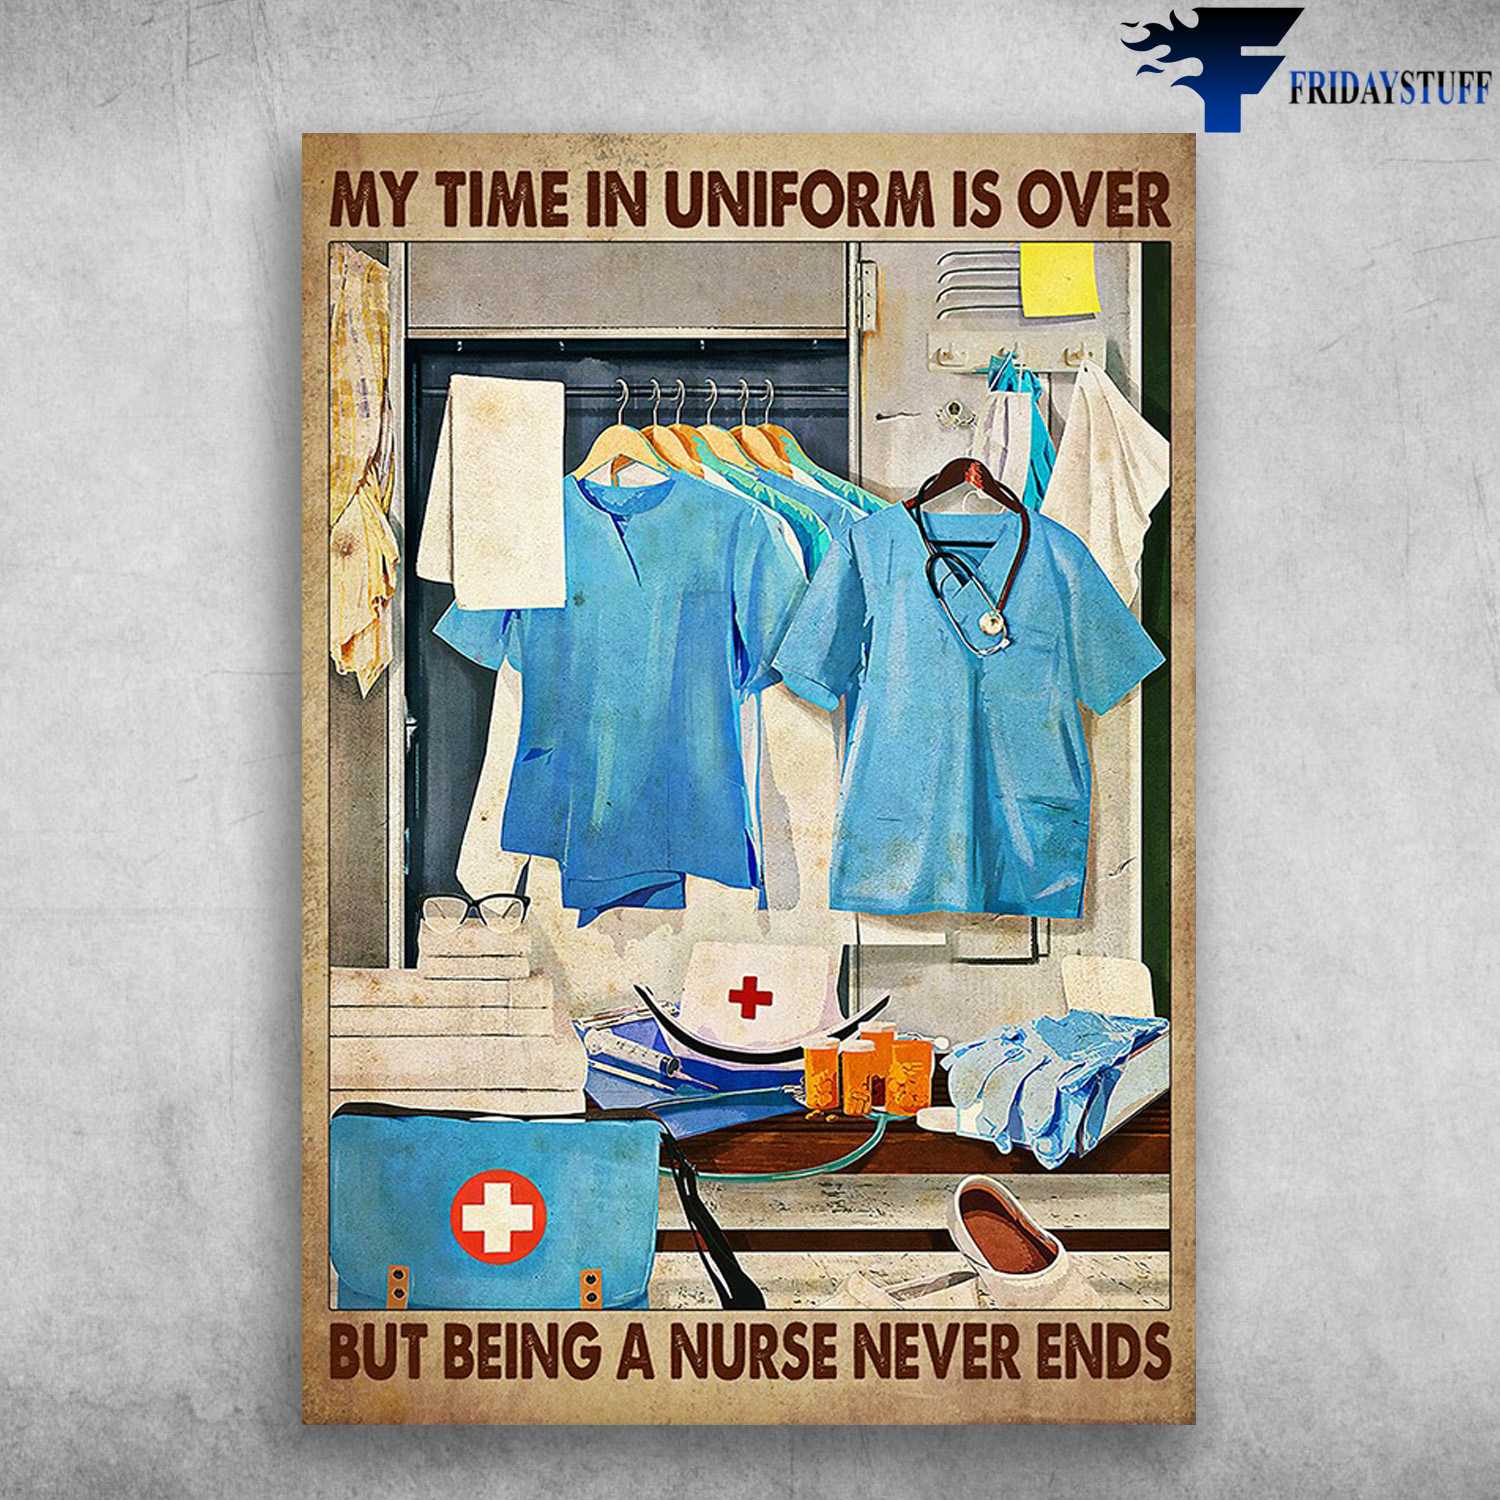 Nurse Doctor Uniform - My Time In Uniform Is Over, But Being A Nurse Never Ends